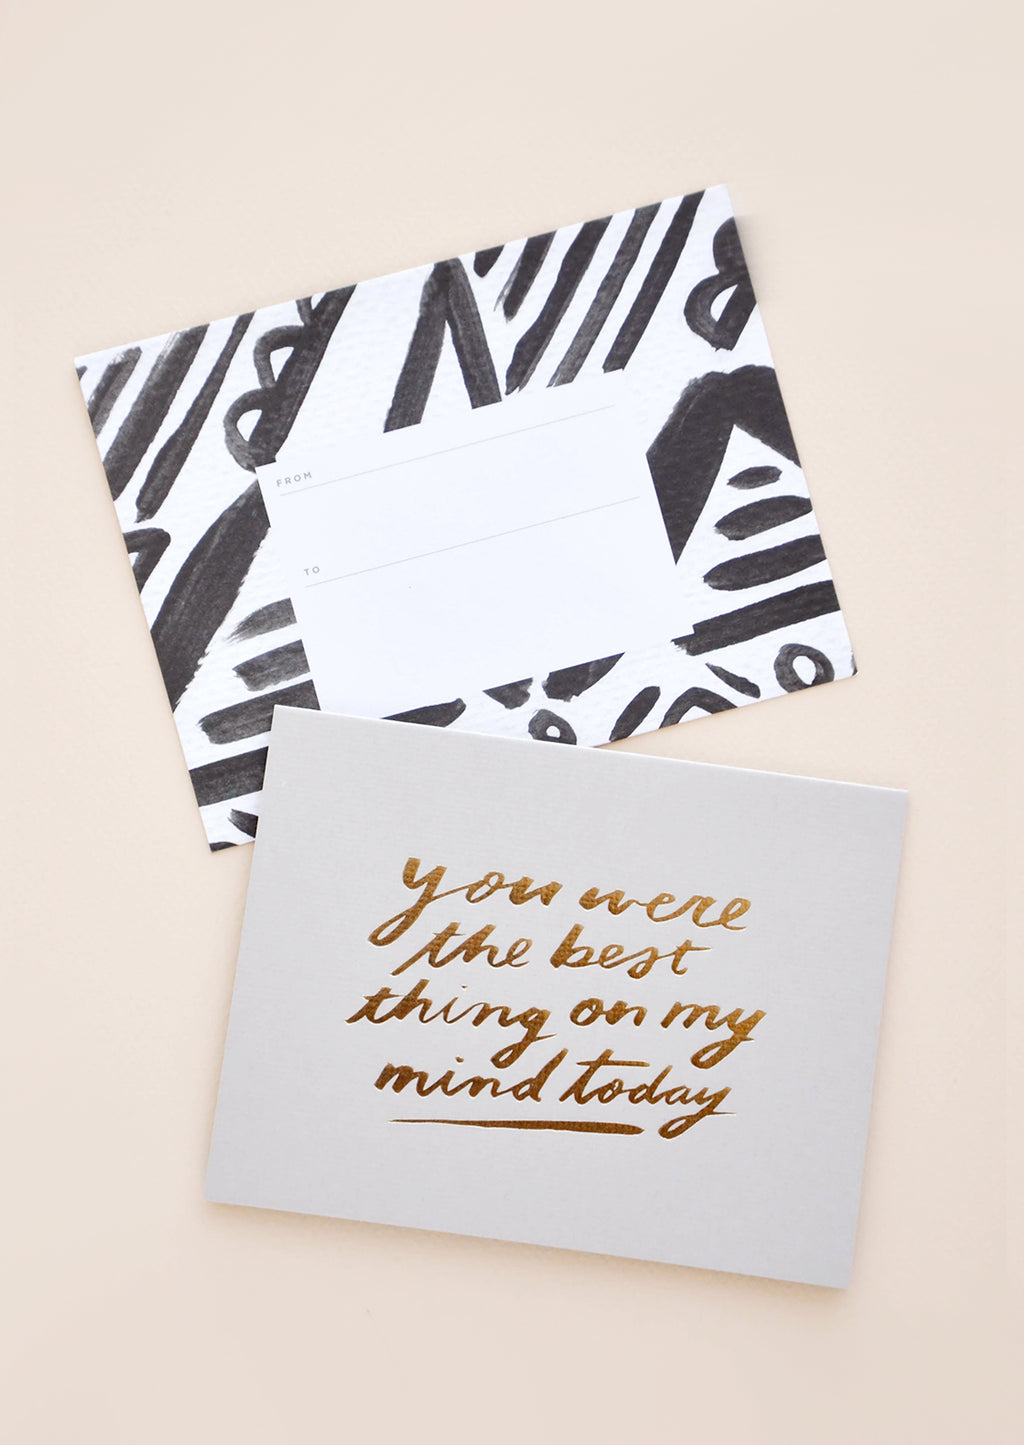 2: Grey greeting card with "You were the best thing on my mind today" in gold foil. Shown with black and white patterned envelope.